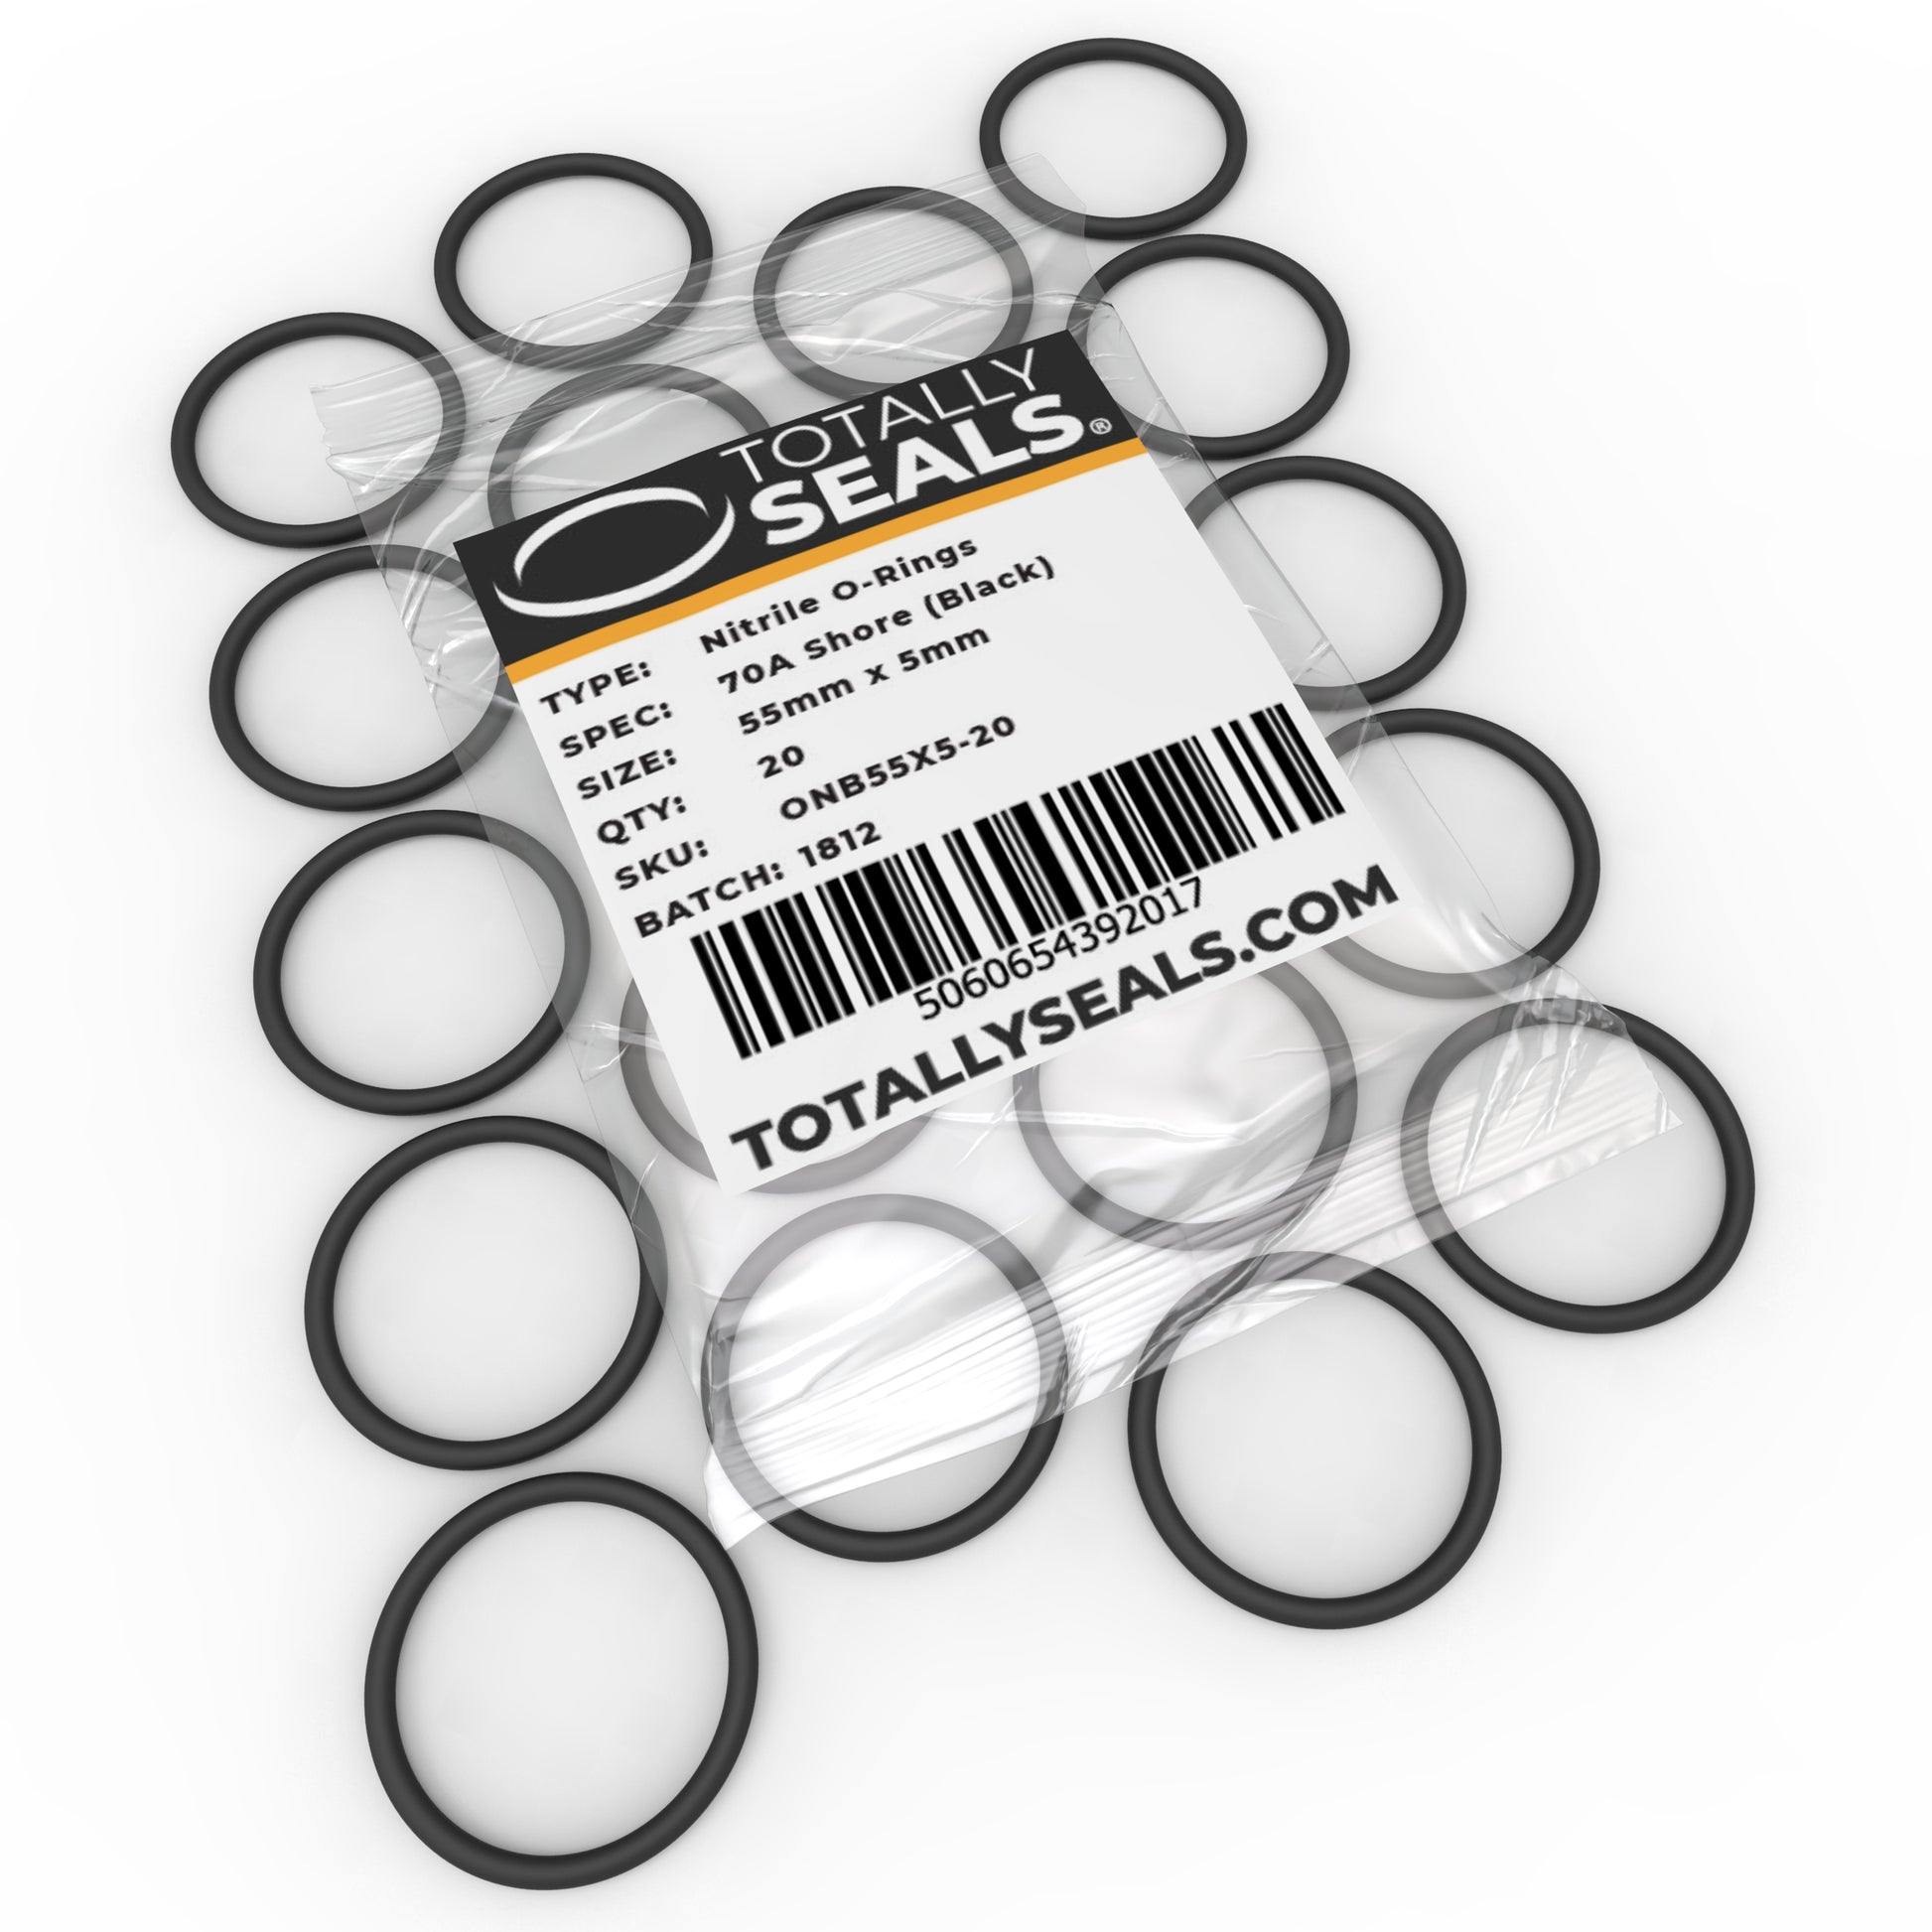 55mm x 5mm (65mm OD) Nitrile O-Rings - Totally Seals®